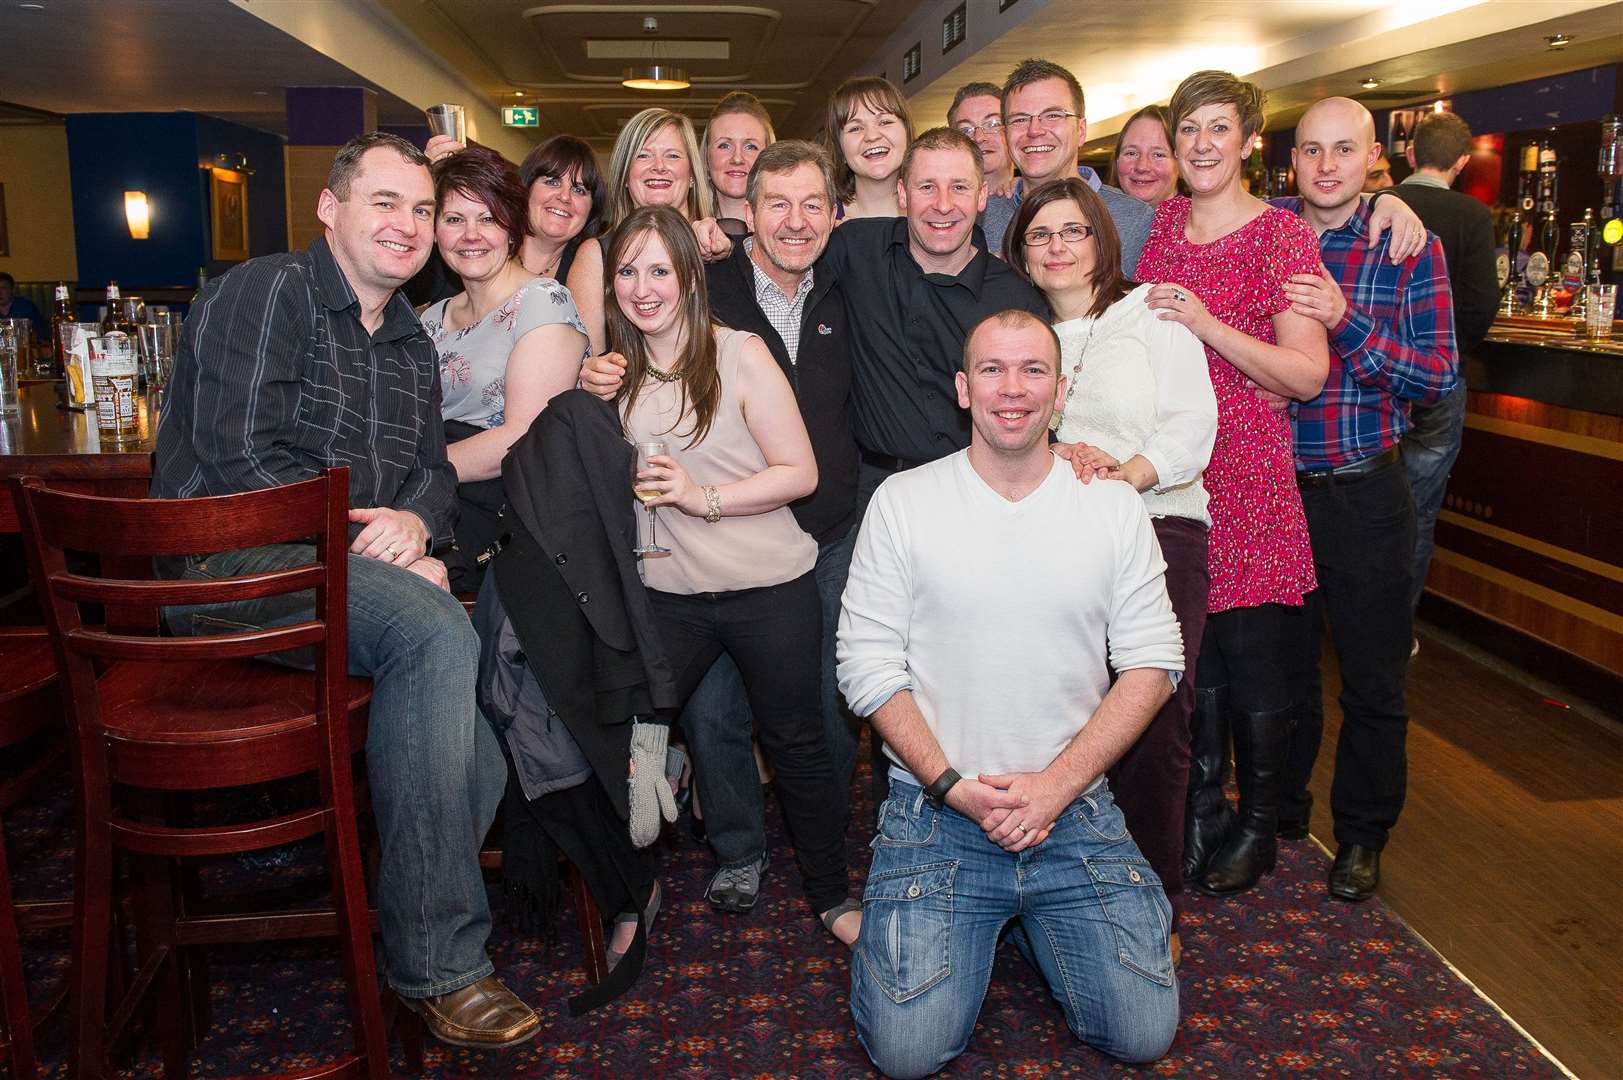 City Seen 12JAN 2013..Jog Scotland Club on a night out in Wetherspoons...Picture: Callum Mackay. Image No. 020851.